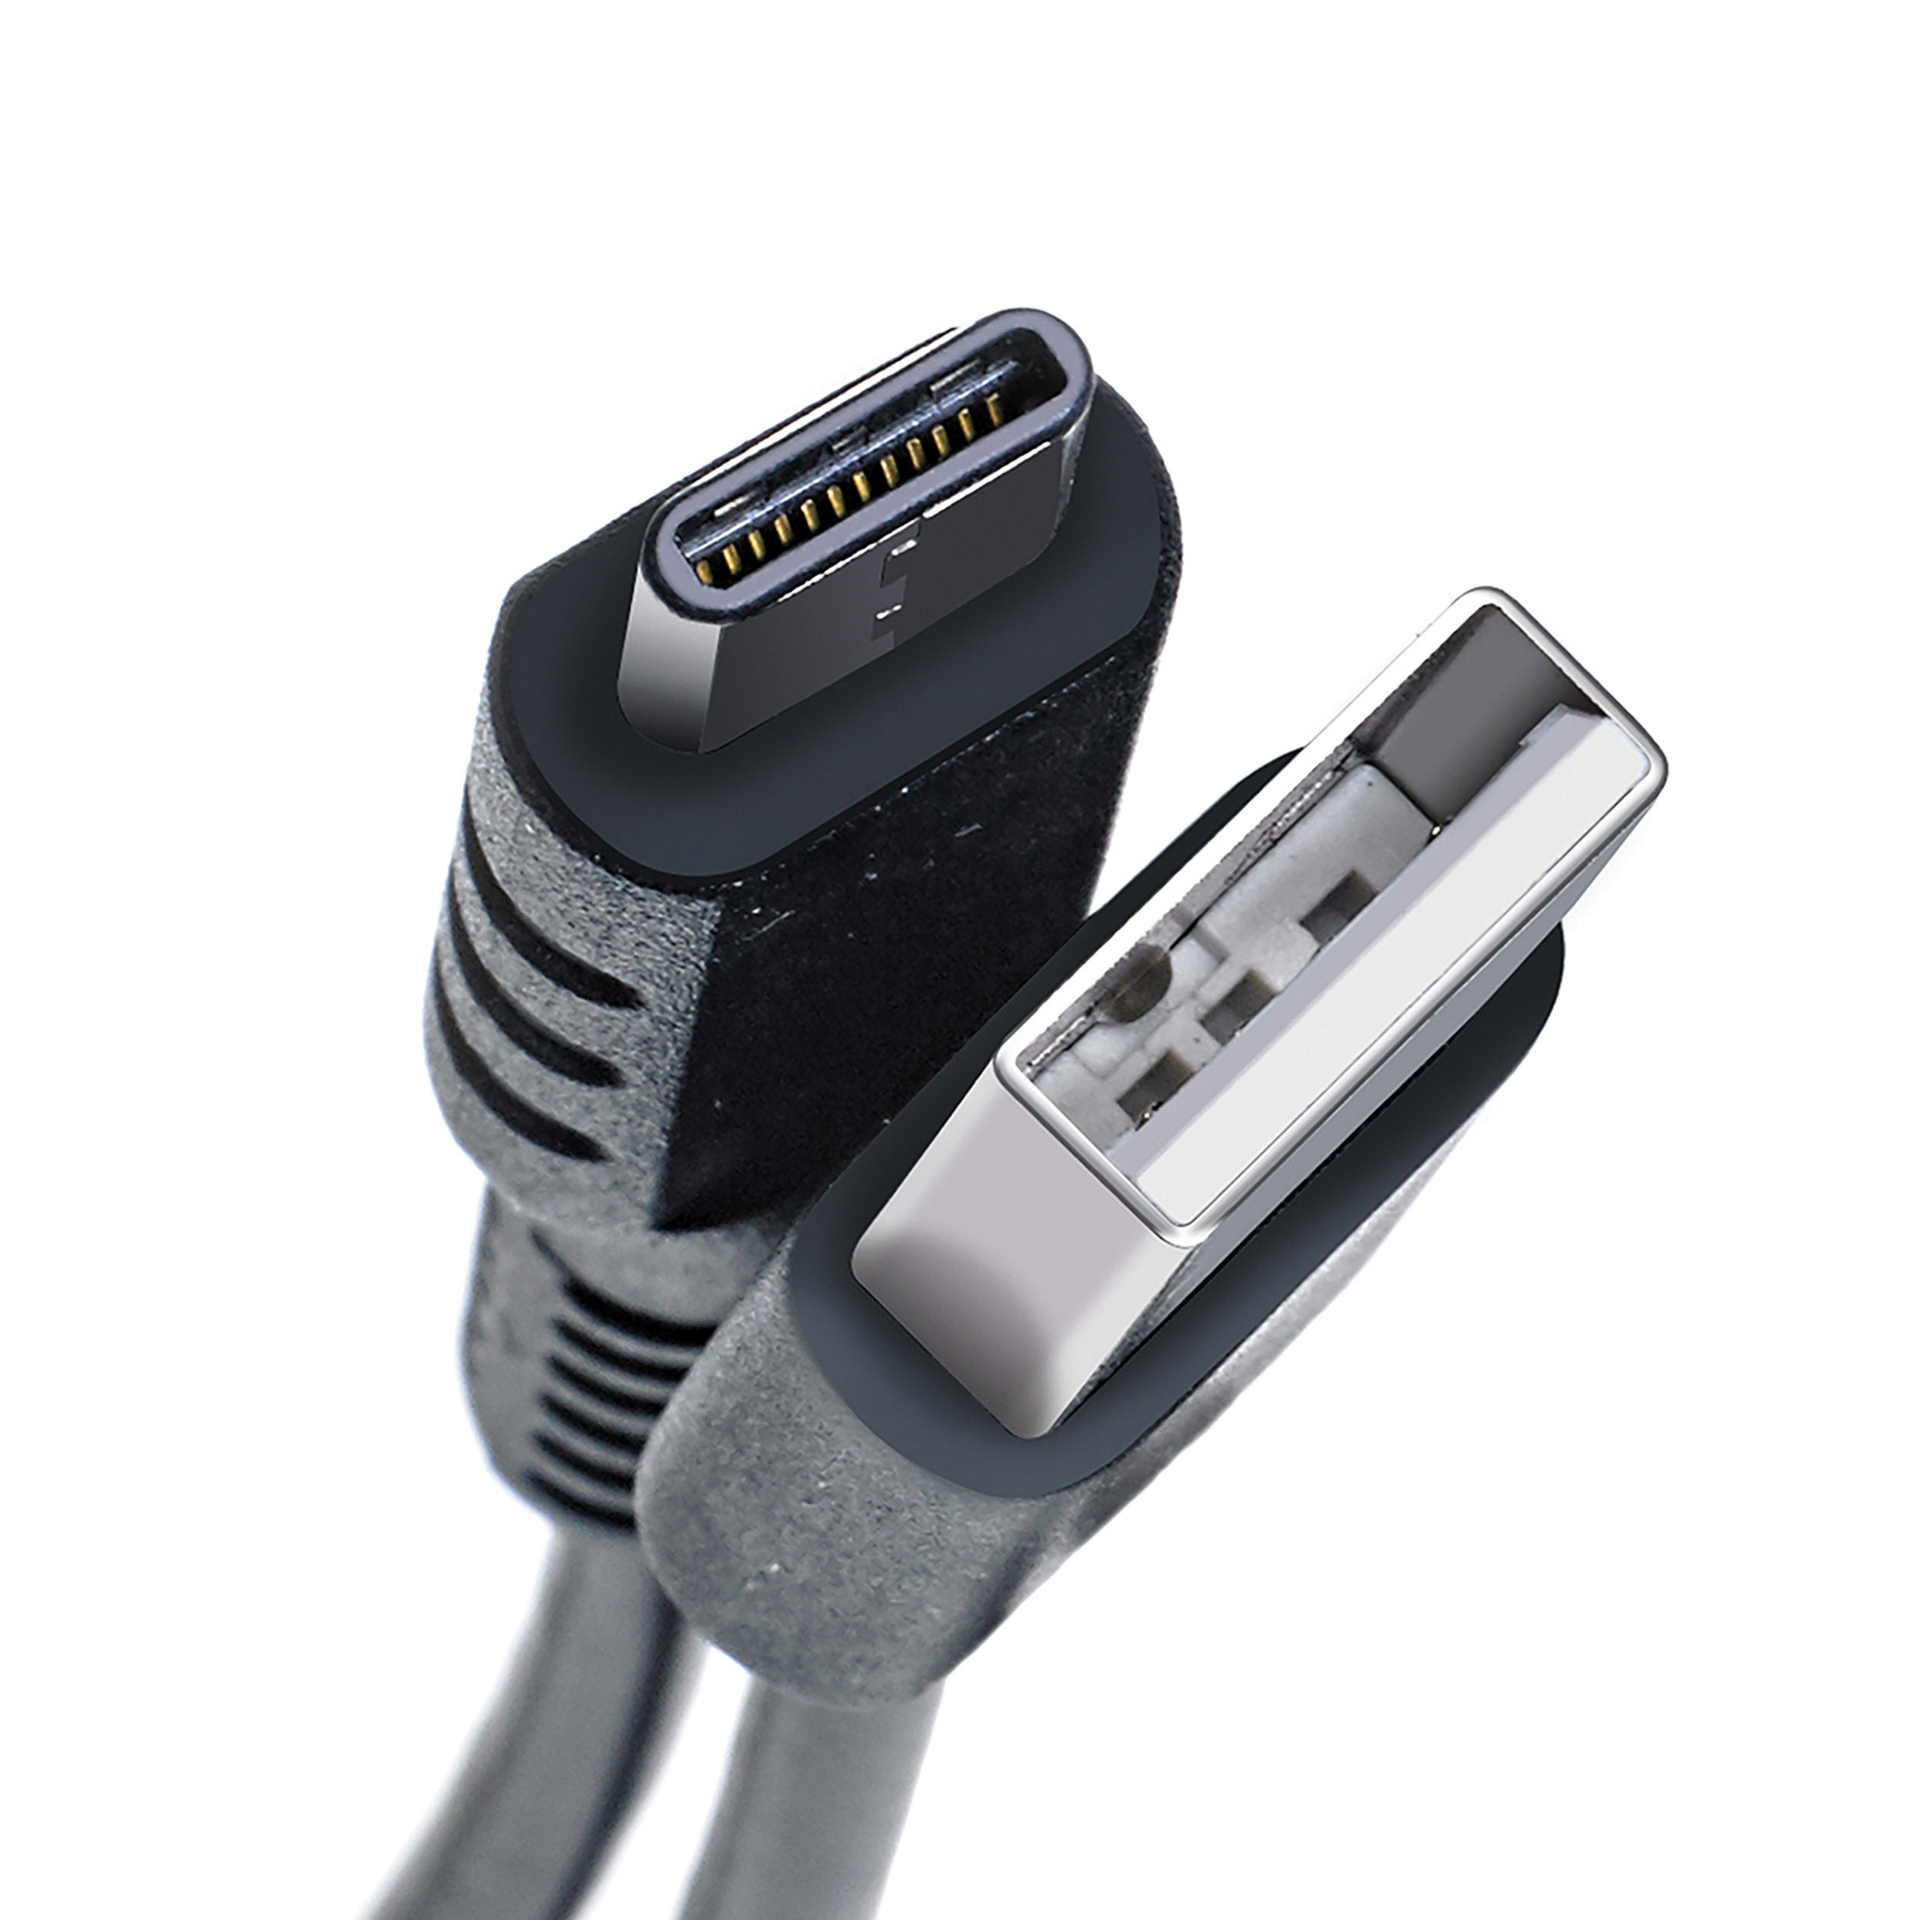 Cavo USB Type-C con connettore reversibile Celly, , large